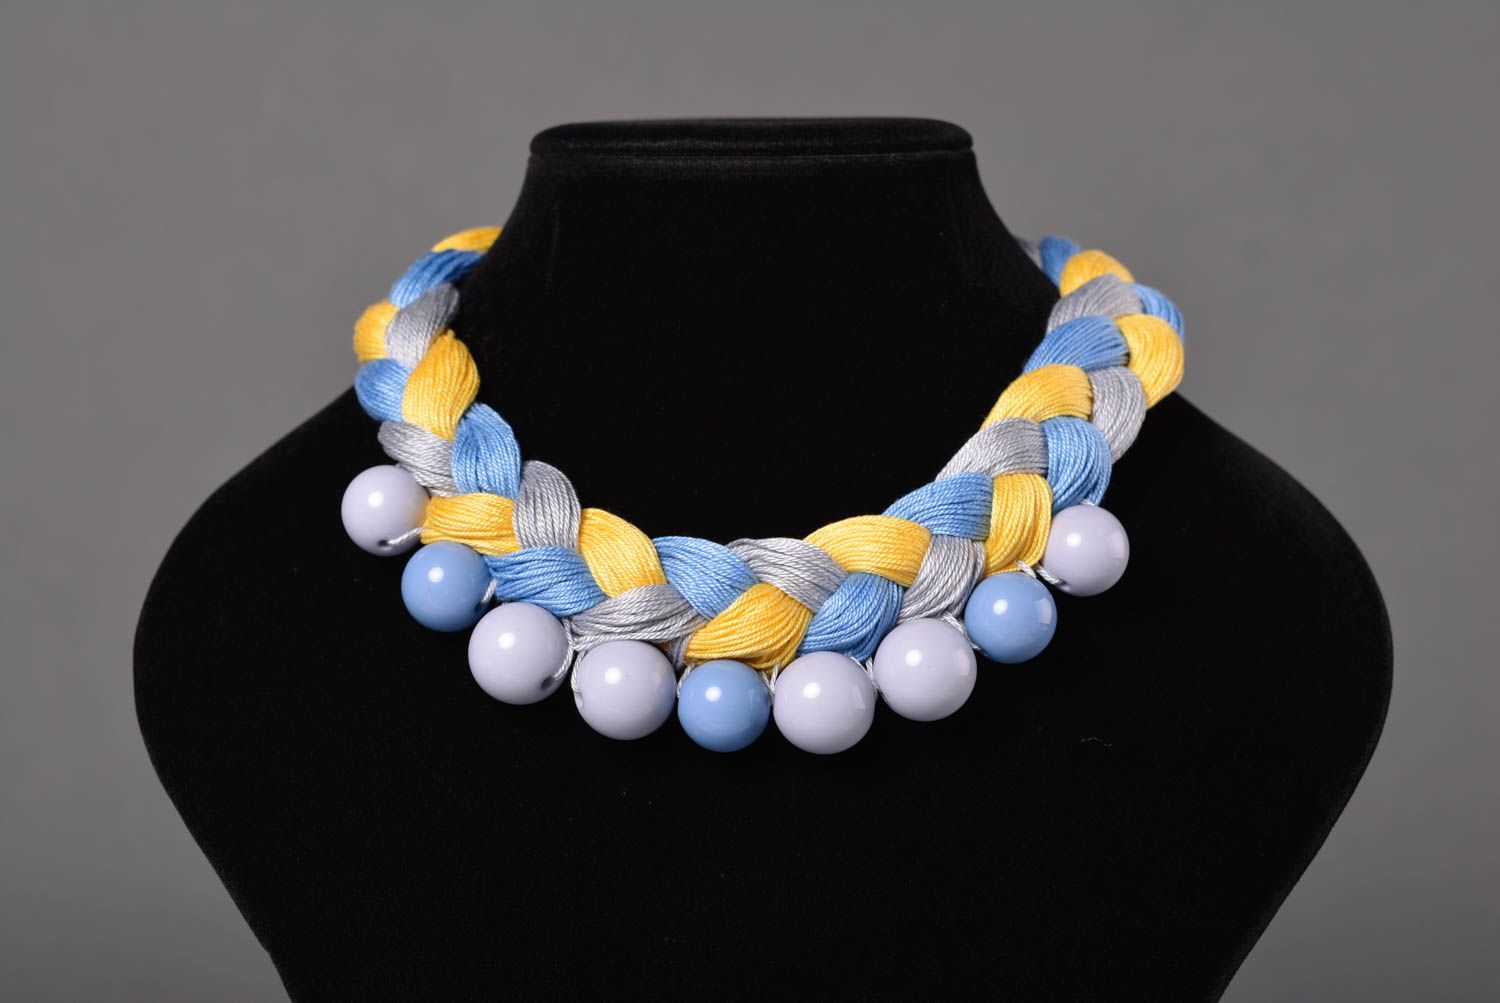 Braided necklace fashion accessories handmade necklace jewelry gifts for women photo 2